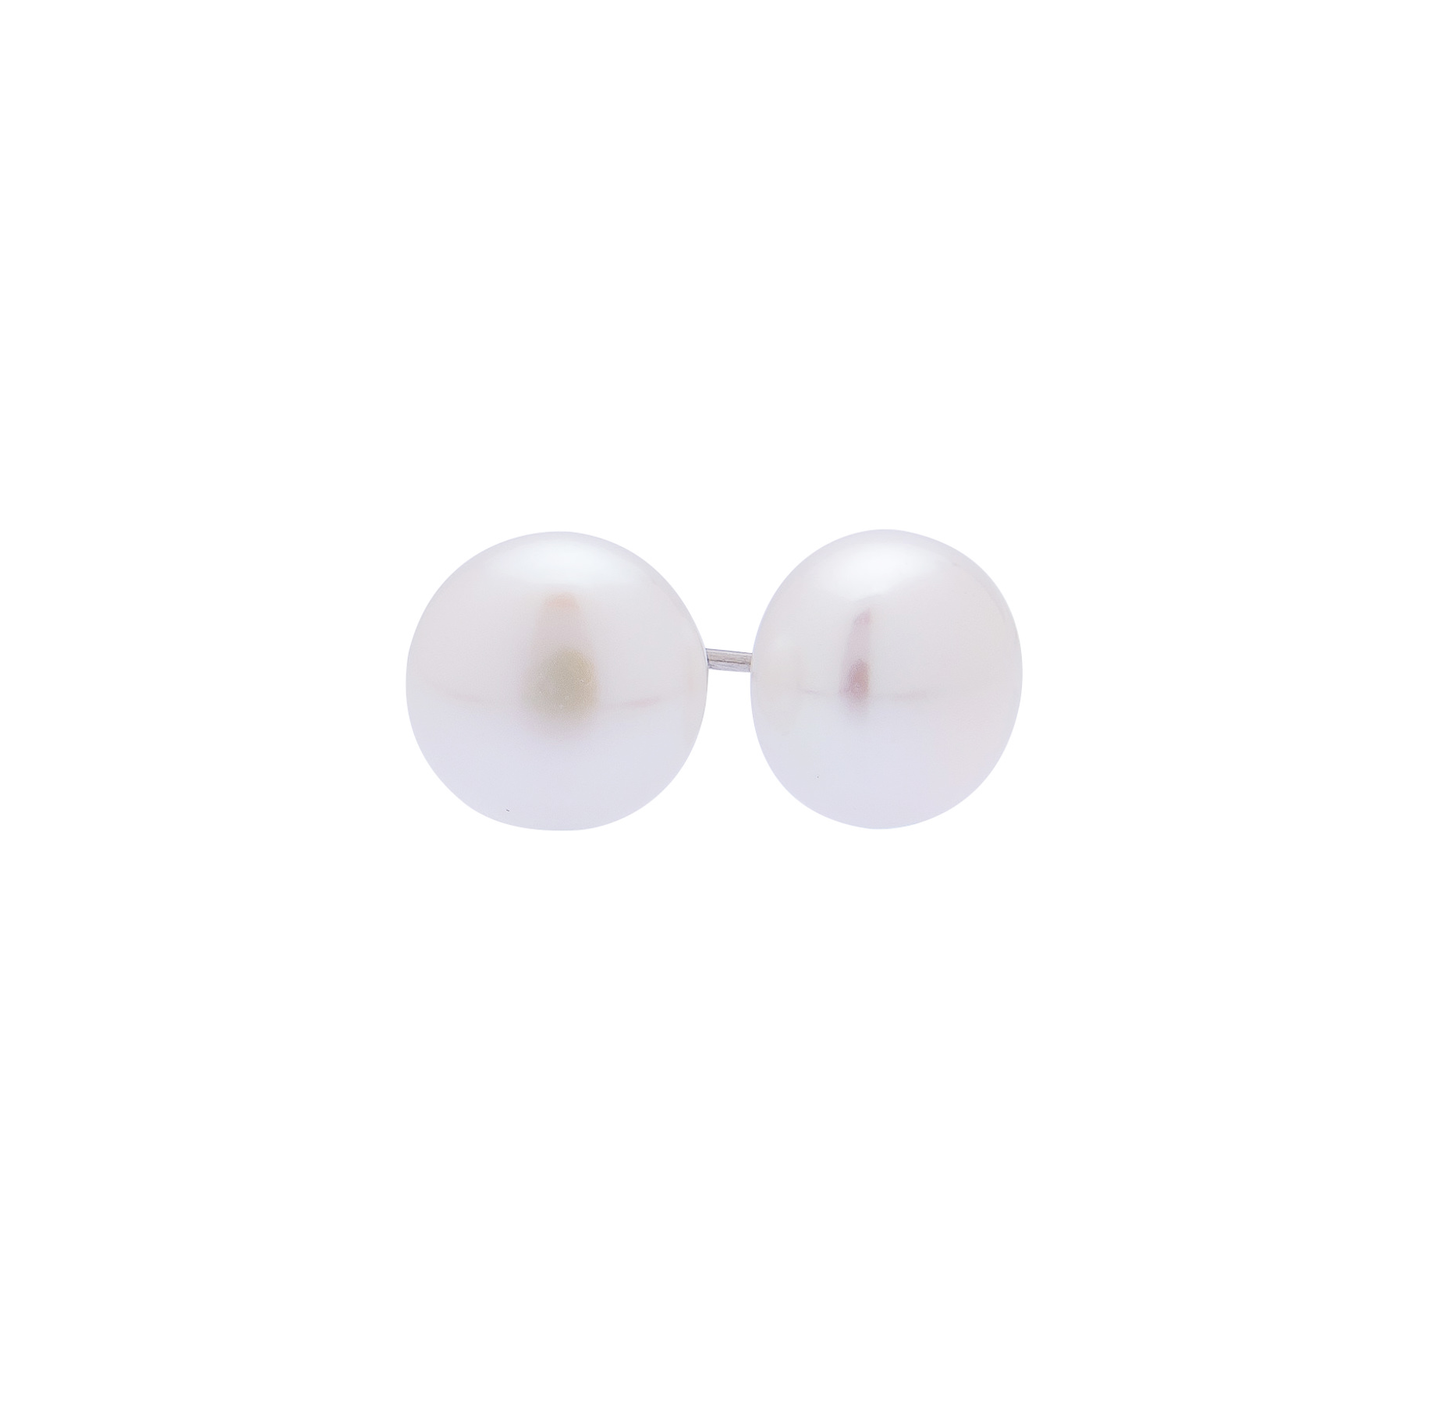 Sabel Pearl 12-13mm White Freshwater Cultured Button Pearl Stud Earrings